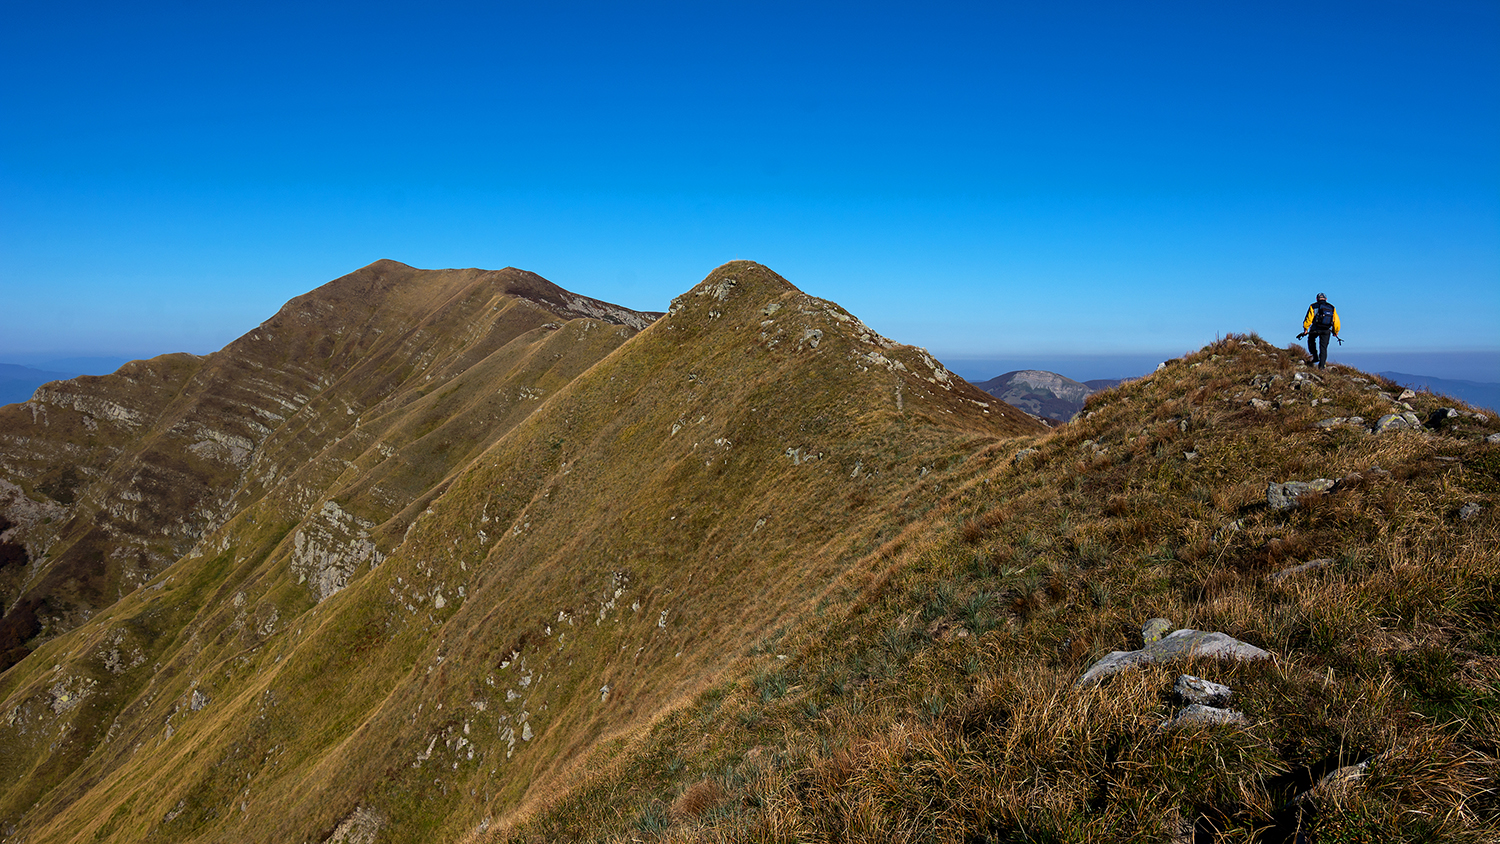 On the ridges of the Apennines...